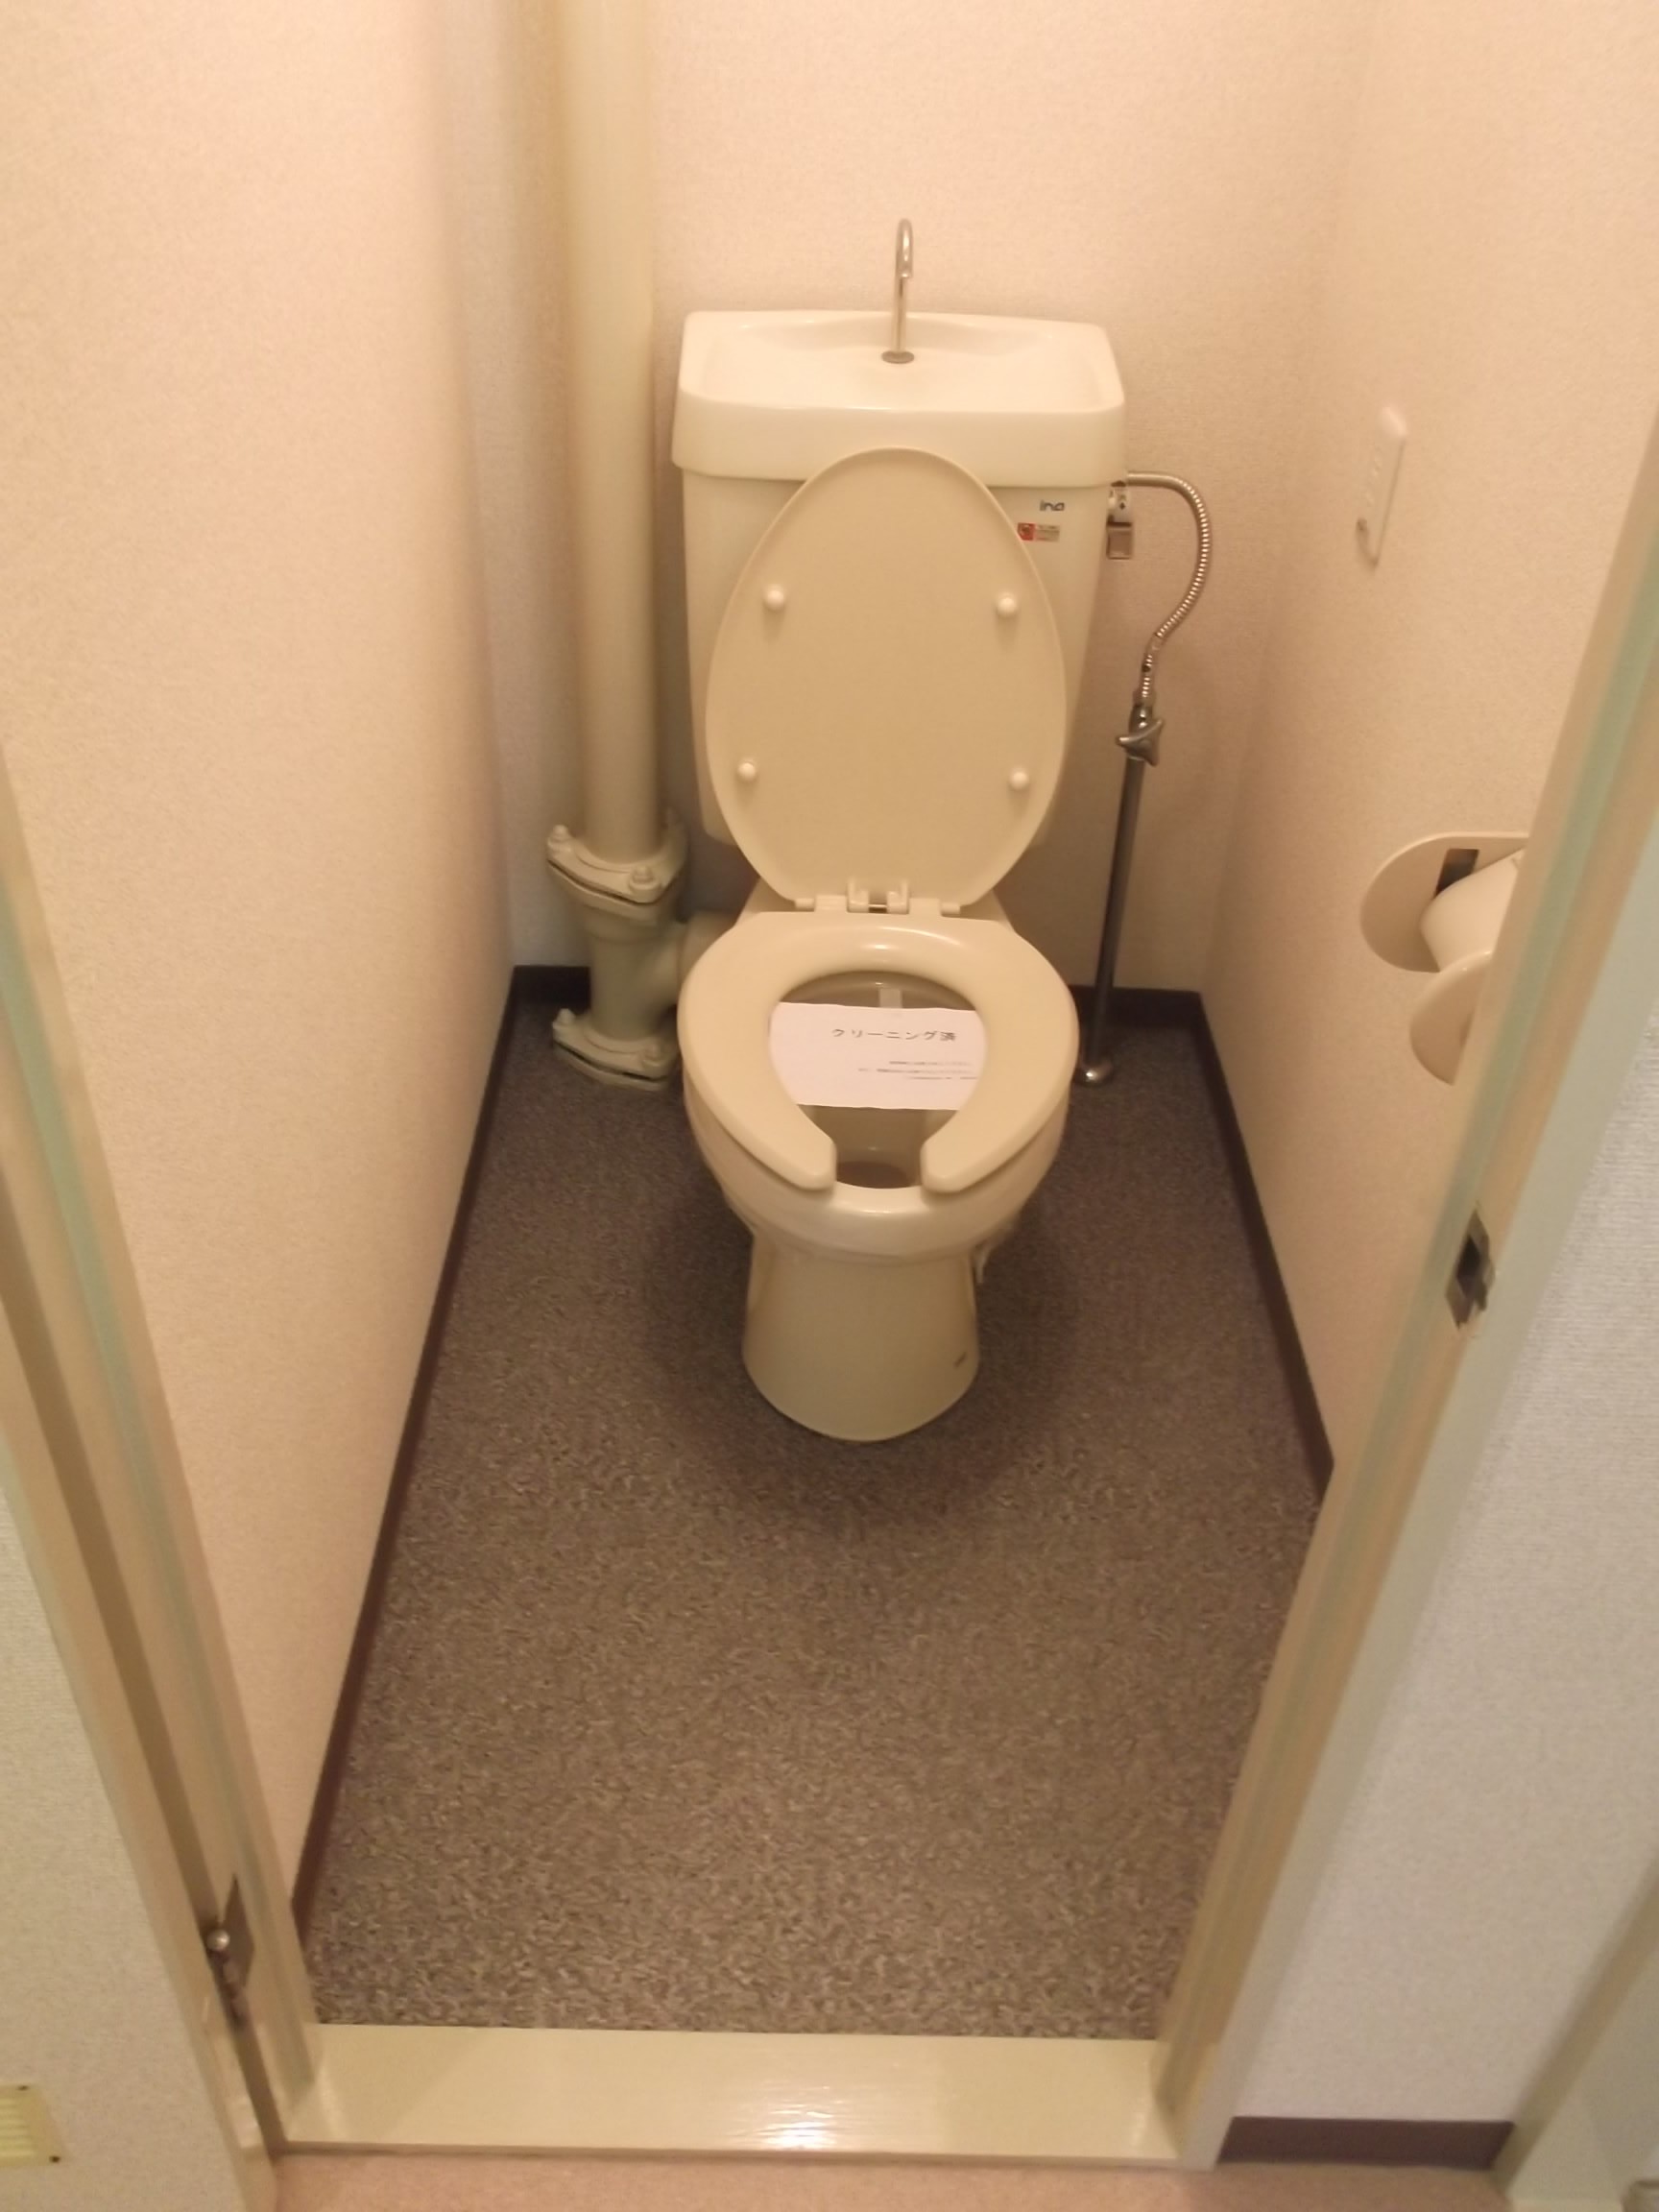 Toilet. Photograph publication of the same type.